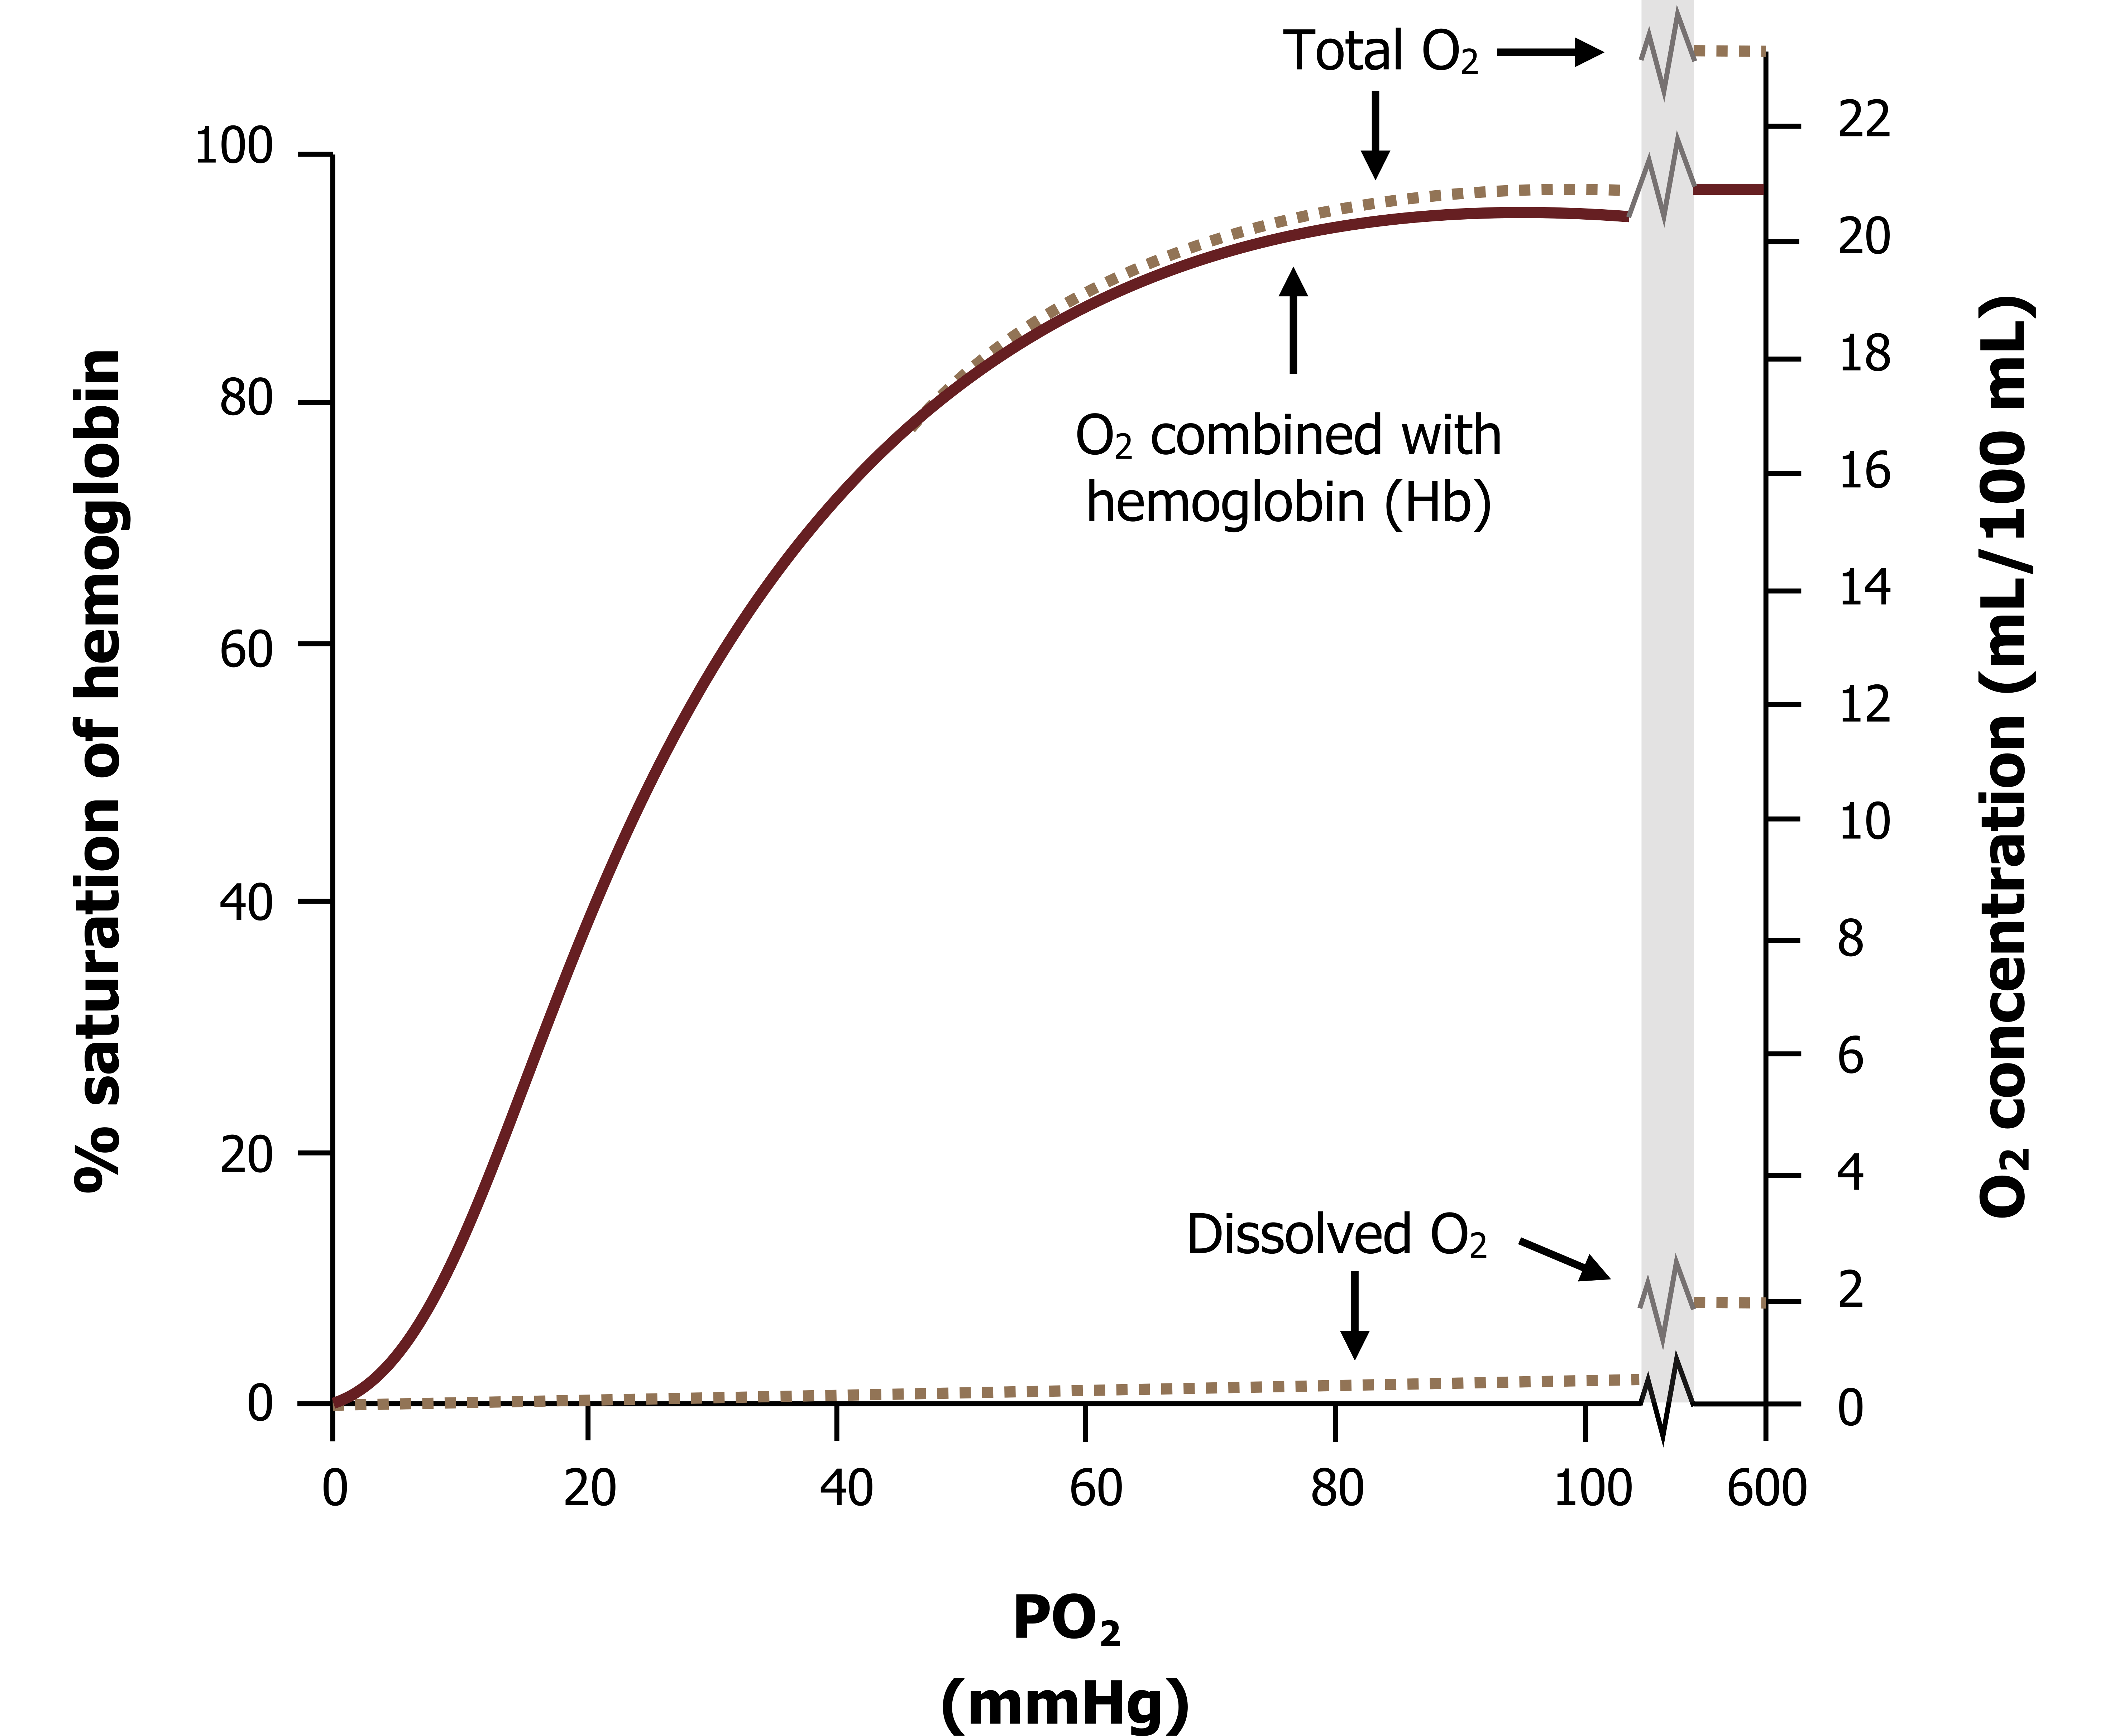 Graph with left y-axis labeled % Hb saturation ranging from 0 to 100, x-axis labeled P O2 (mmHg) ranging from 0 to 100, break in graph to 600, and right y-axis labeled O2 concentration (mL/100 mL) ranging from 0 to 23. All y values given are based on the left y-axis. Dissolved O2: Horizontal line at y=0 with slight upward trend to y=2 at x=100, break in the graph horizontal line at y=10. O2 combined with Hb: Curve ending at (100, 90) and continues to break in graph at y=95. Total O2: Similar curve shape as O2 combined with Hb, but taller ending at (100, 95) and continues to break in graph at y=100.